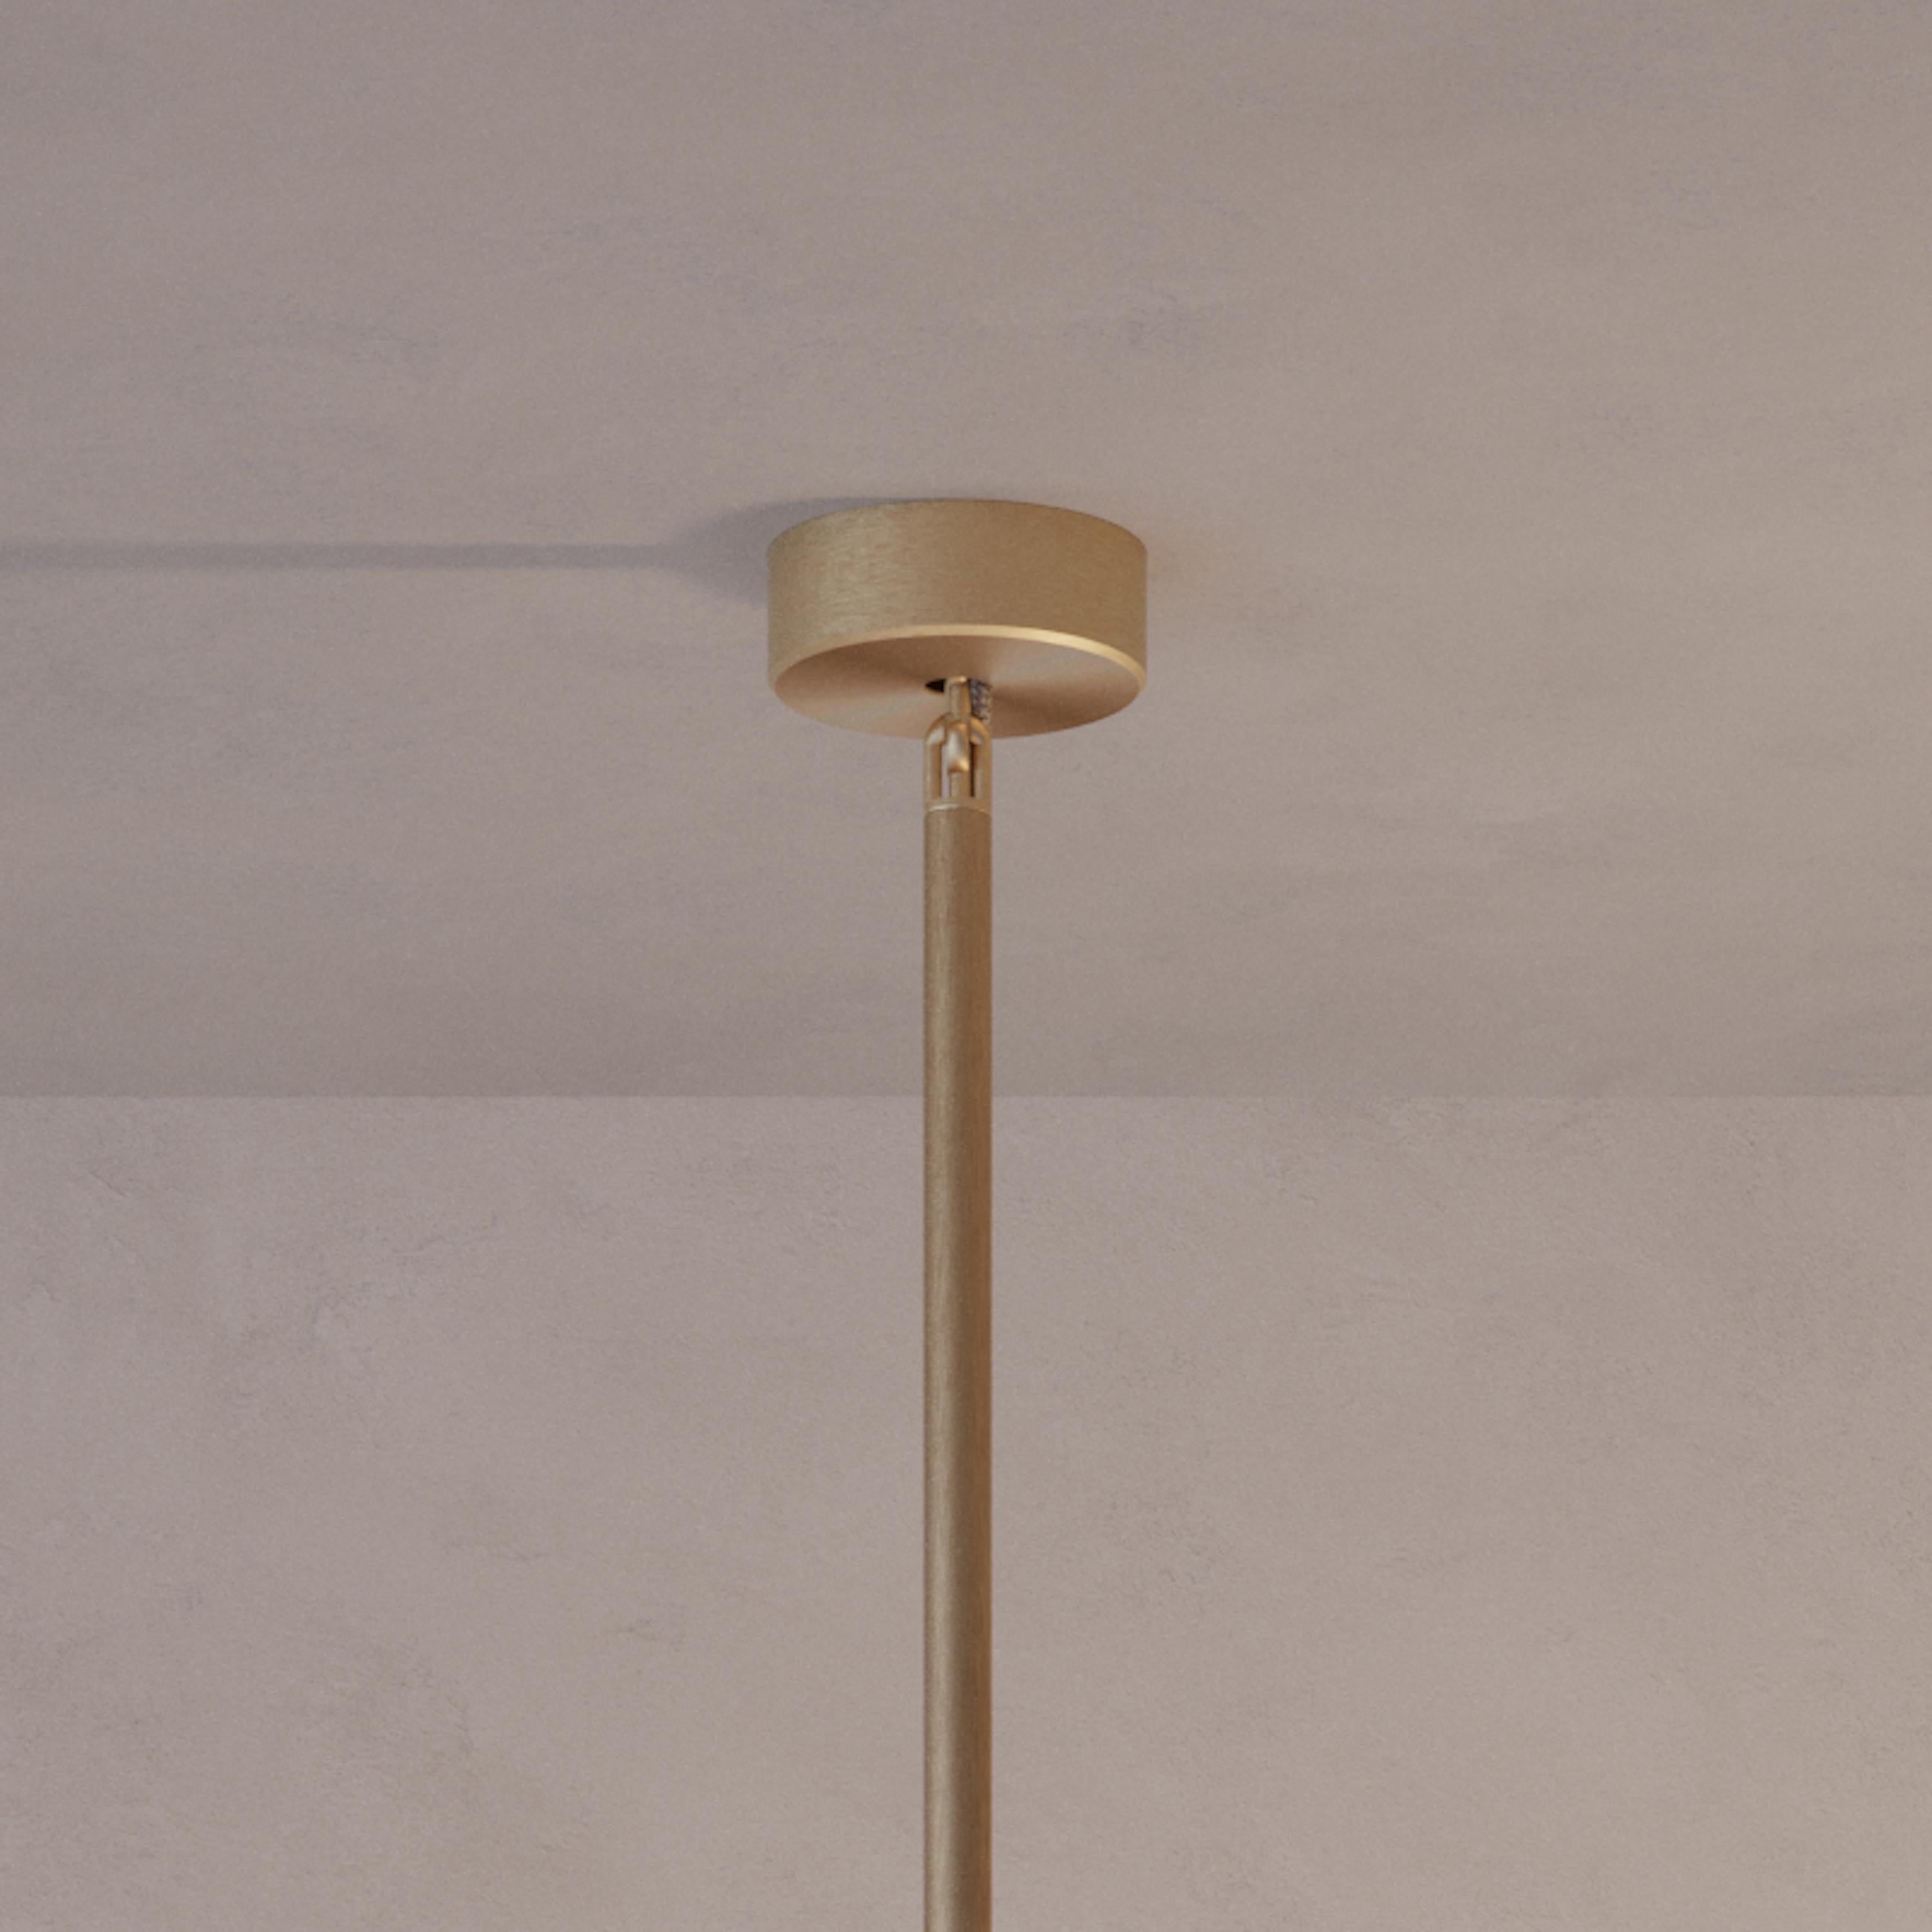 'Cosmic Orbit Solo Purion' Handmade Gloss White Lacquered Brass Ceiling Light In New Condition For Sale In London, GB